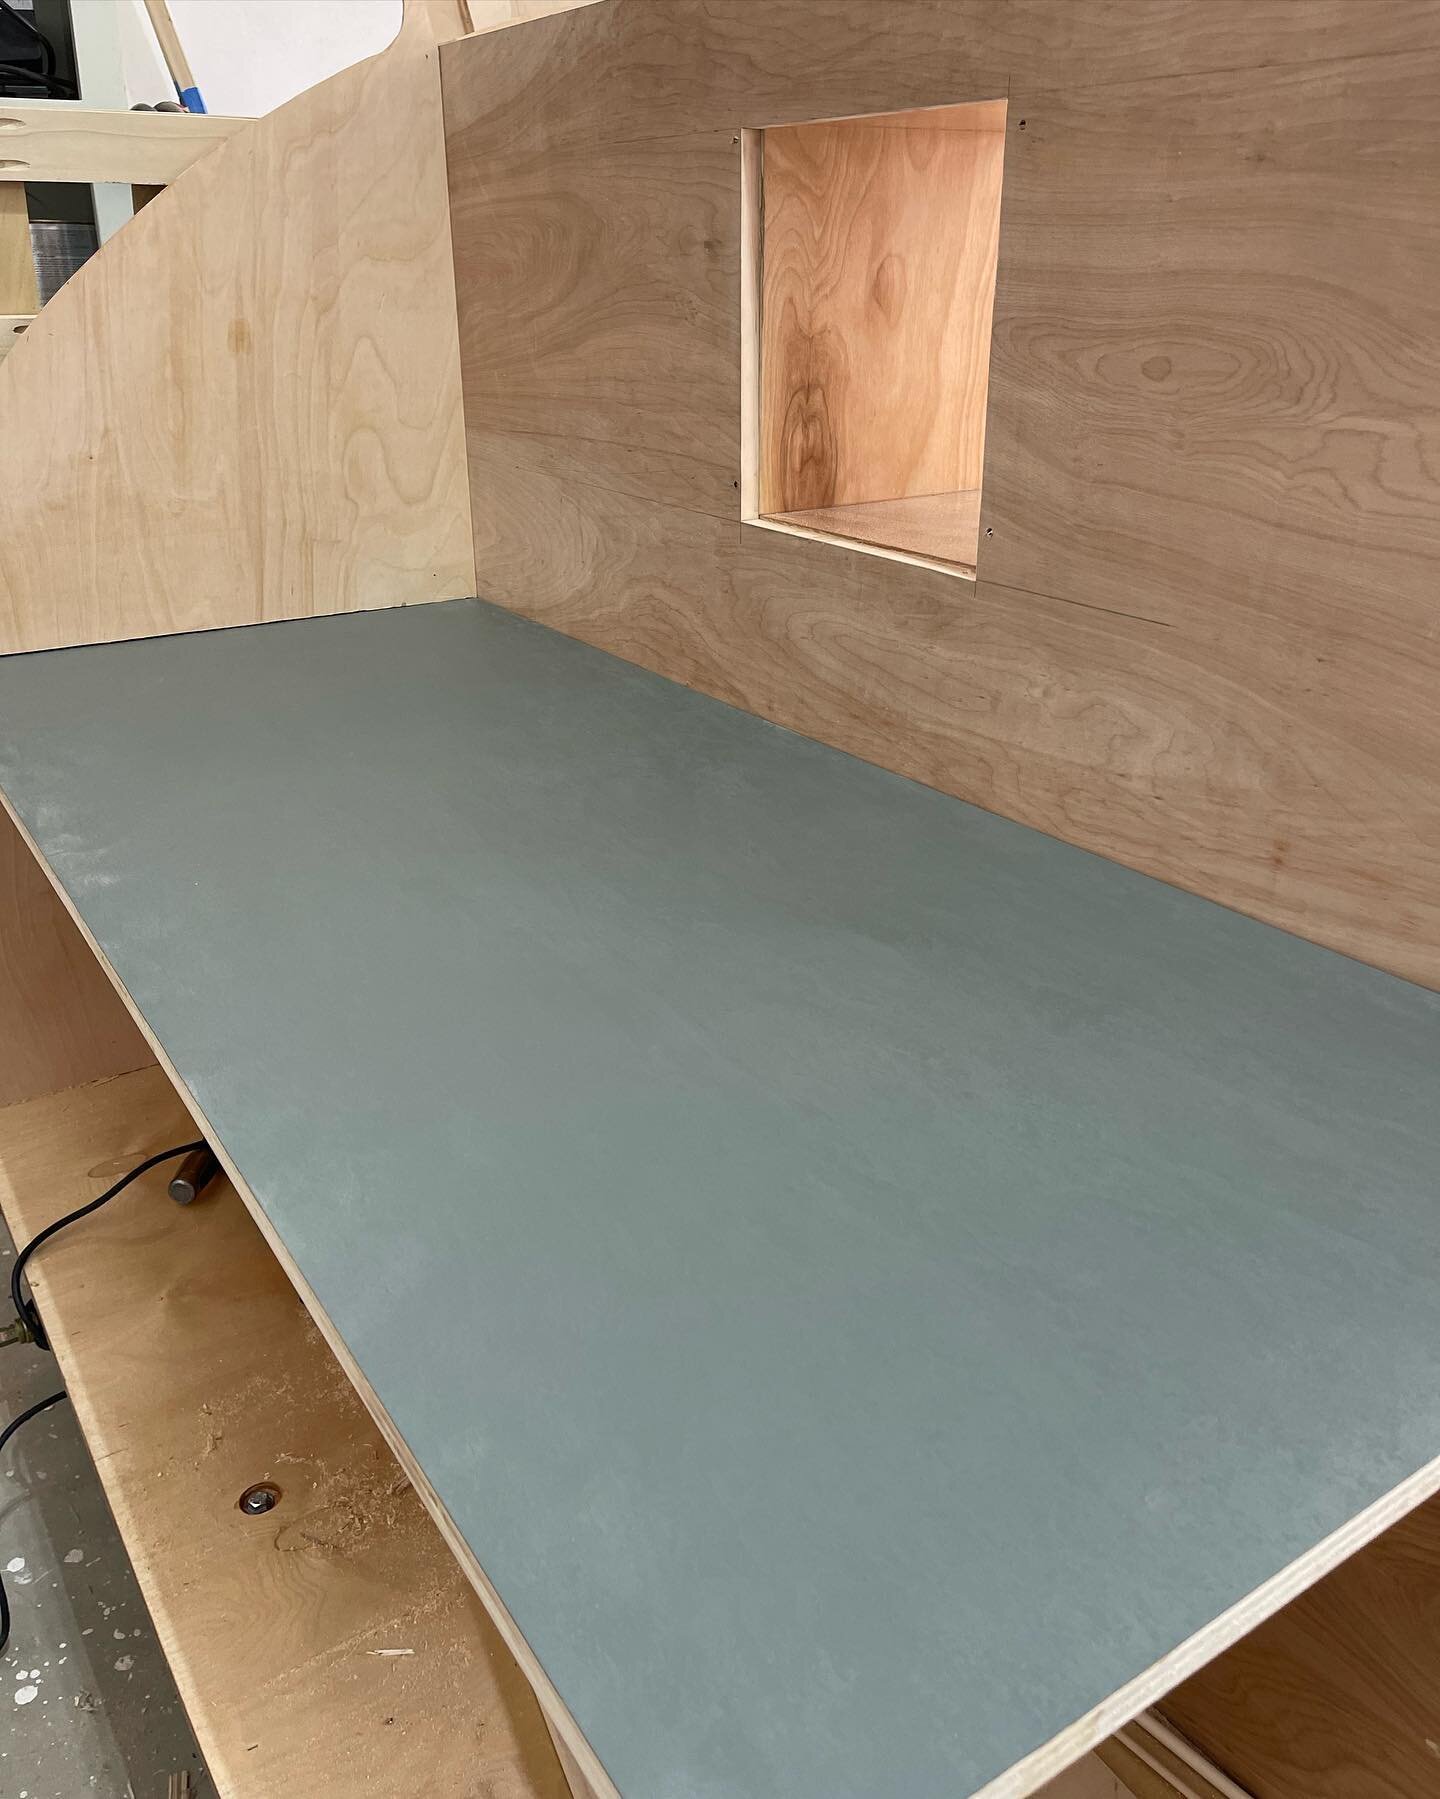 Got the formica glued to the countertop and the interior table today. Then struggled massively with getting the second wall on&hellip; We will try again tomorrow. 

&hellip;

#teardropthalassa #teardrop #teardroptrailer #teardropcamper #teardroptrail